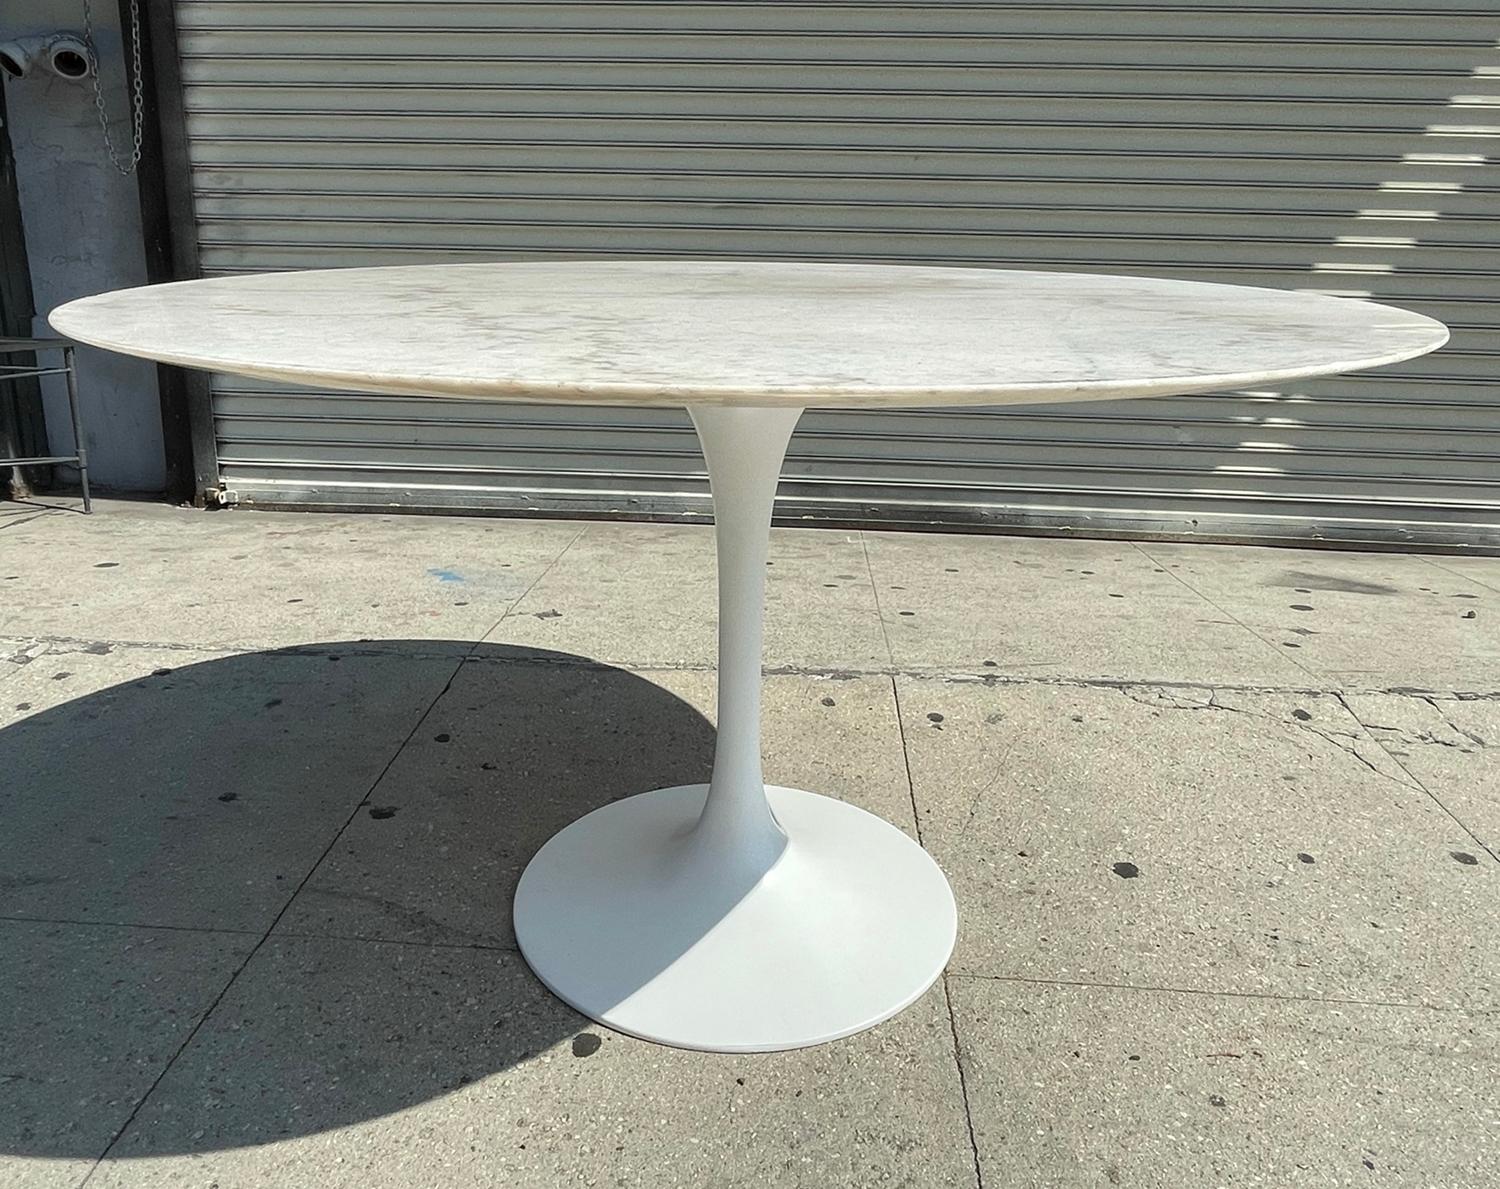 Beautiful round dining or center table having a tulip stile metal base topped with a round granite top.

Measurements:
48 inches round x 28 inches high x 27 inches to the bottom of the table.